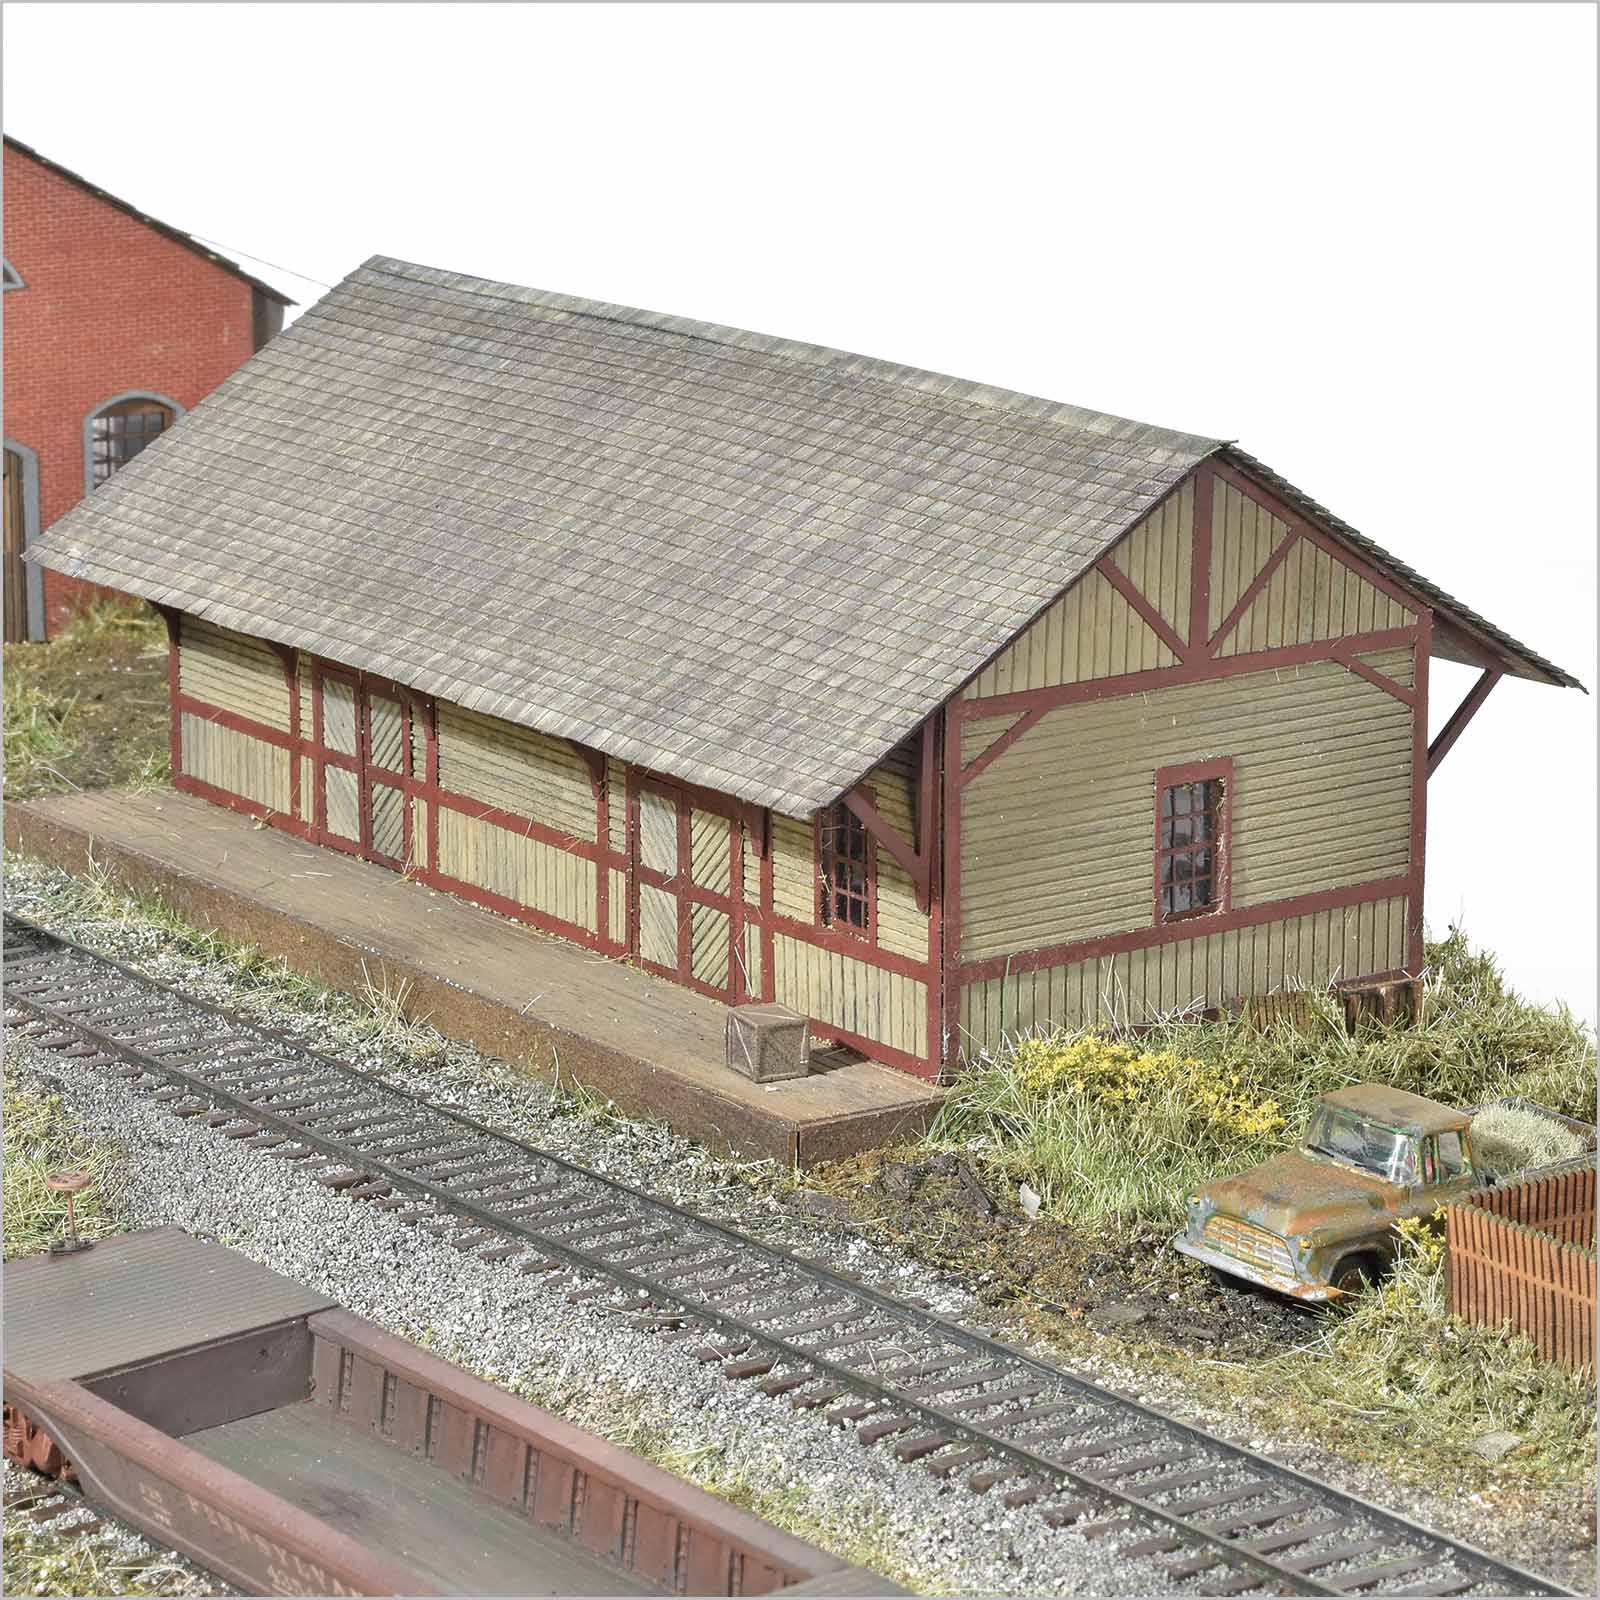 Standard Pennsylvania Railroad Freight Station, HO Scale, by Scientific